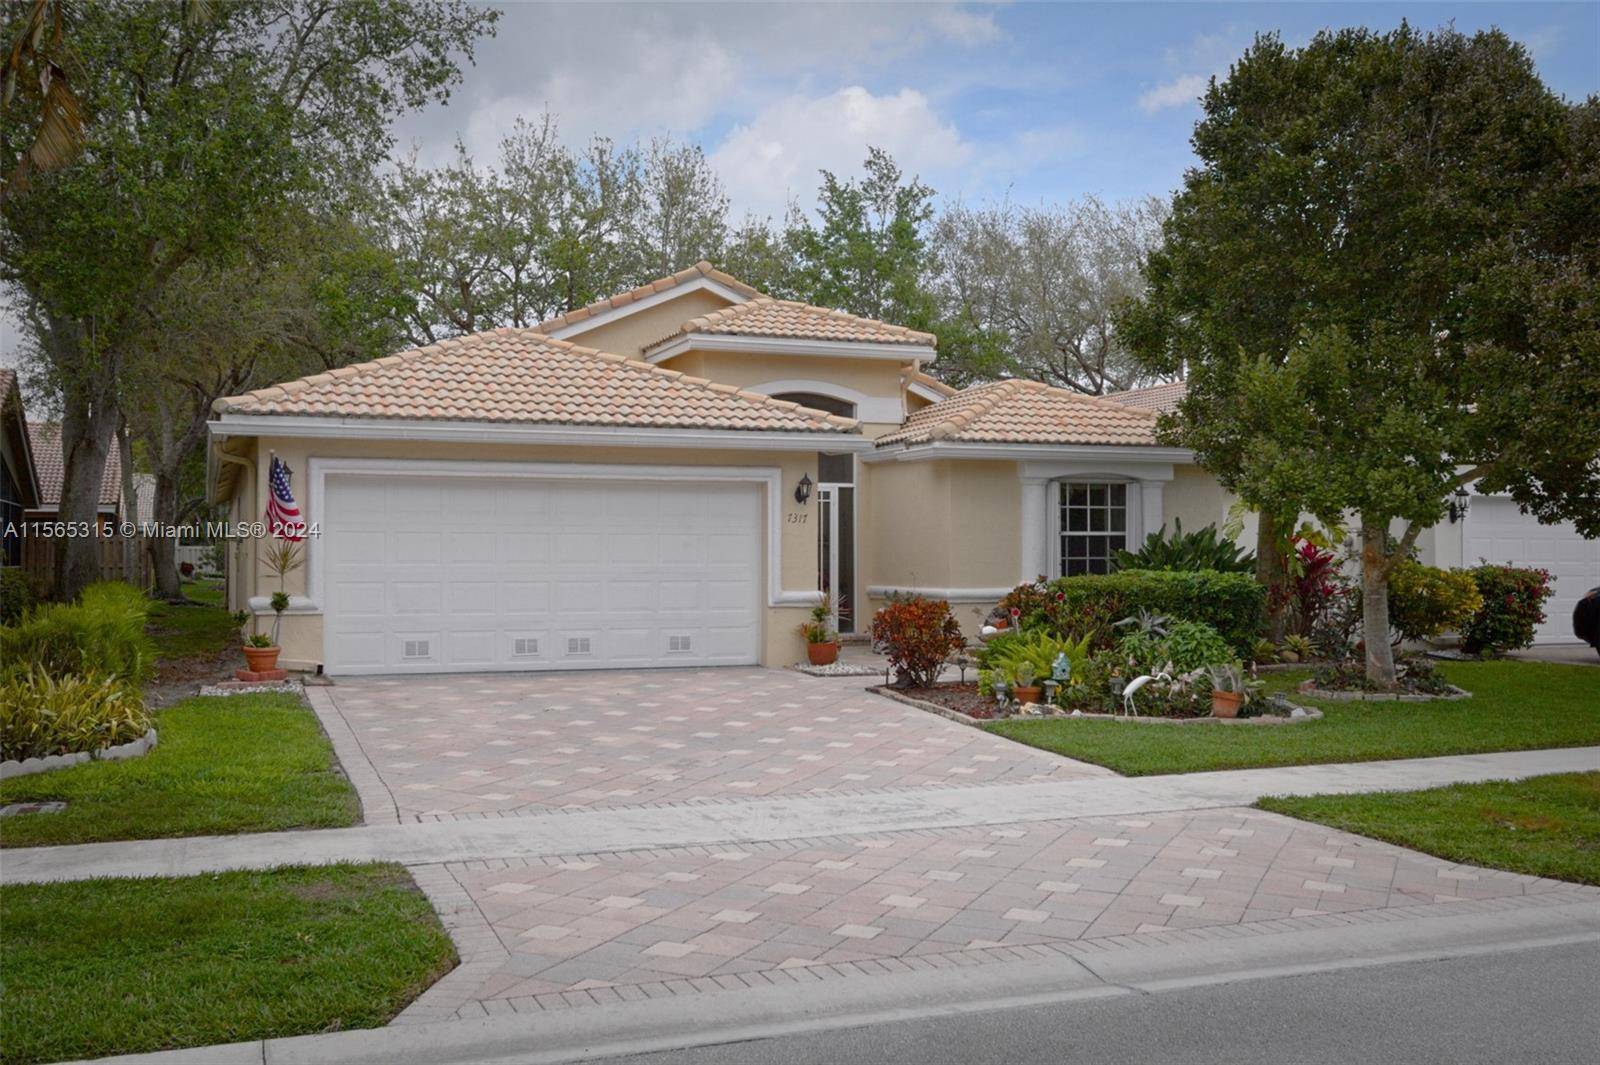 This beautiful newly renovated 3 2 lakefront home within a gated community is the largest model home in San Marco.